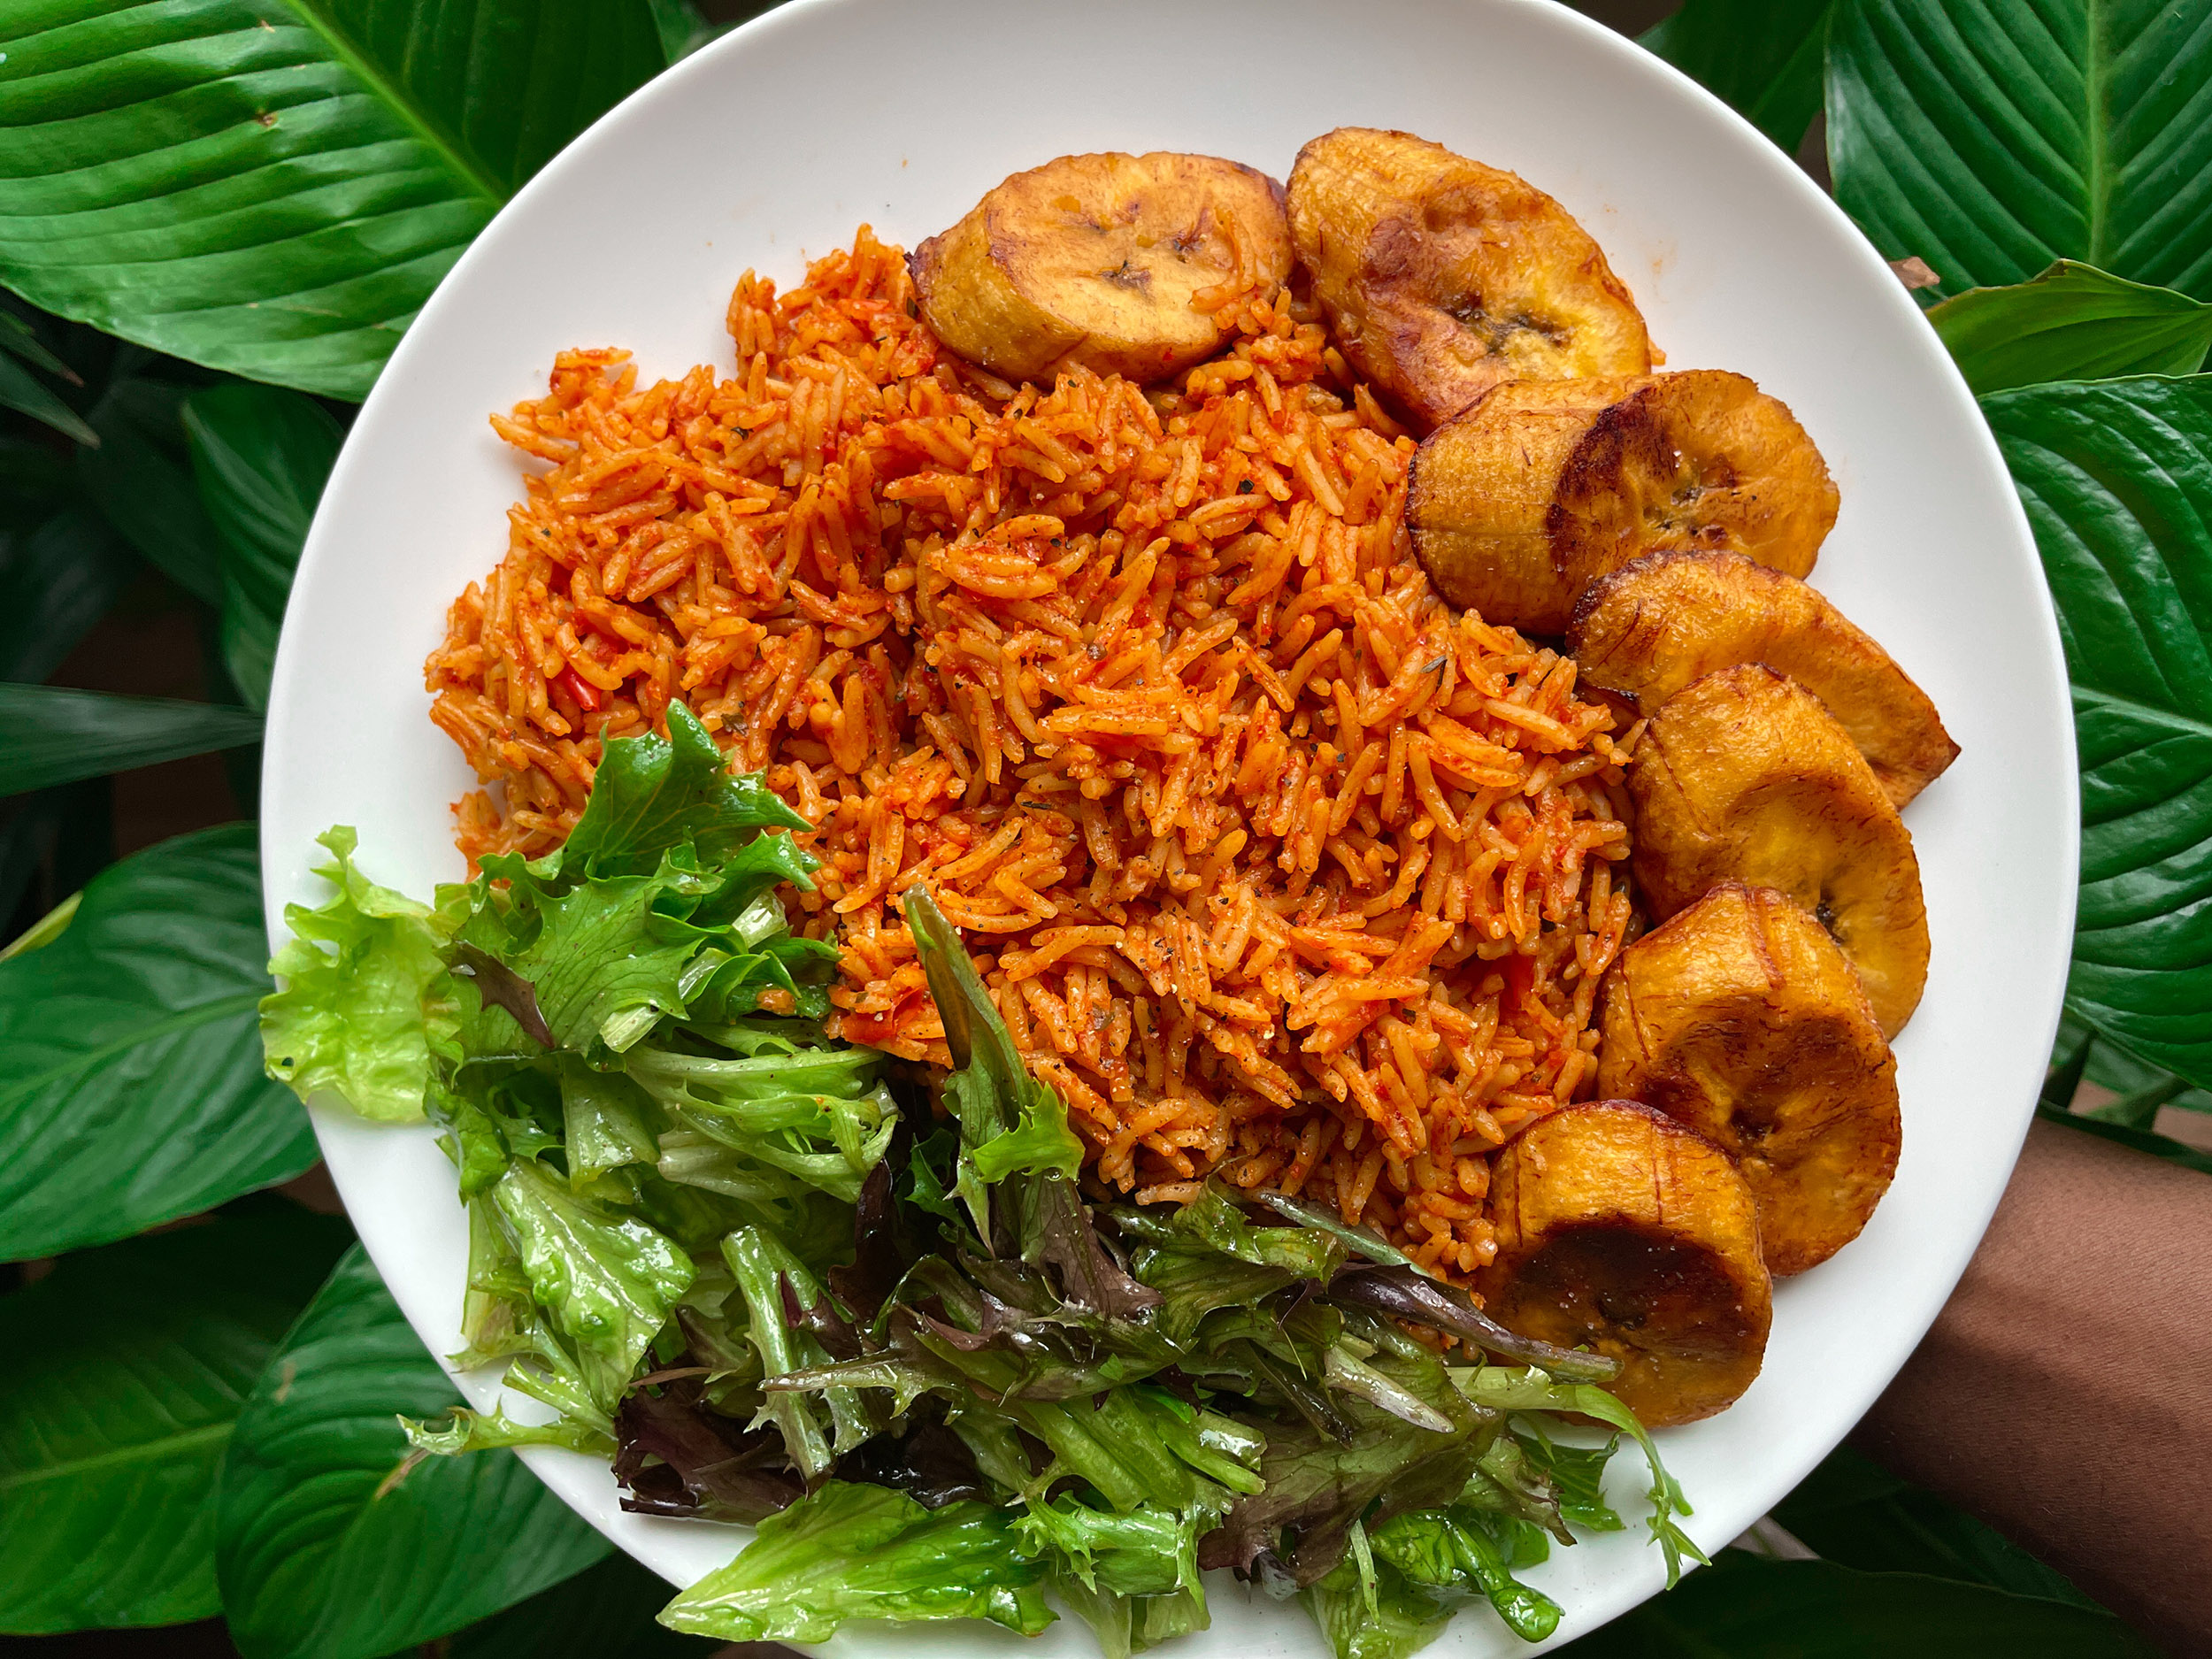 A beautifully presented plate of jollof rice with fried plantain and green salad against a background of lush green leaves.